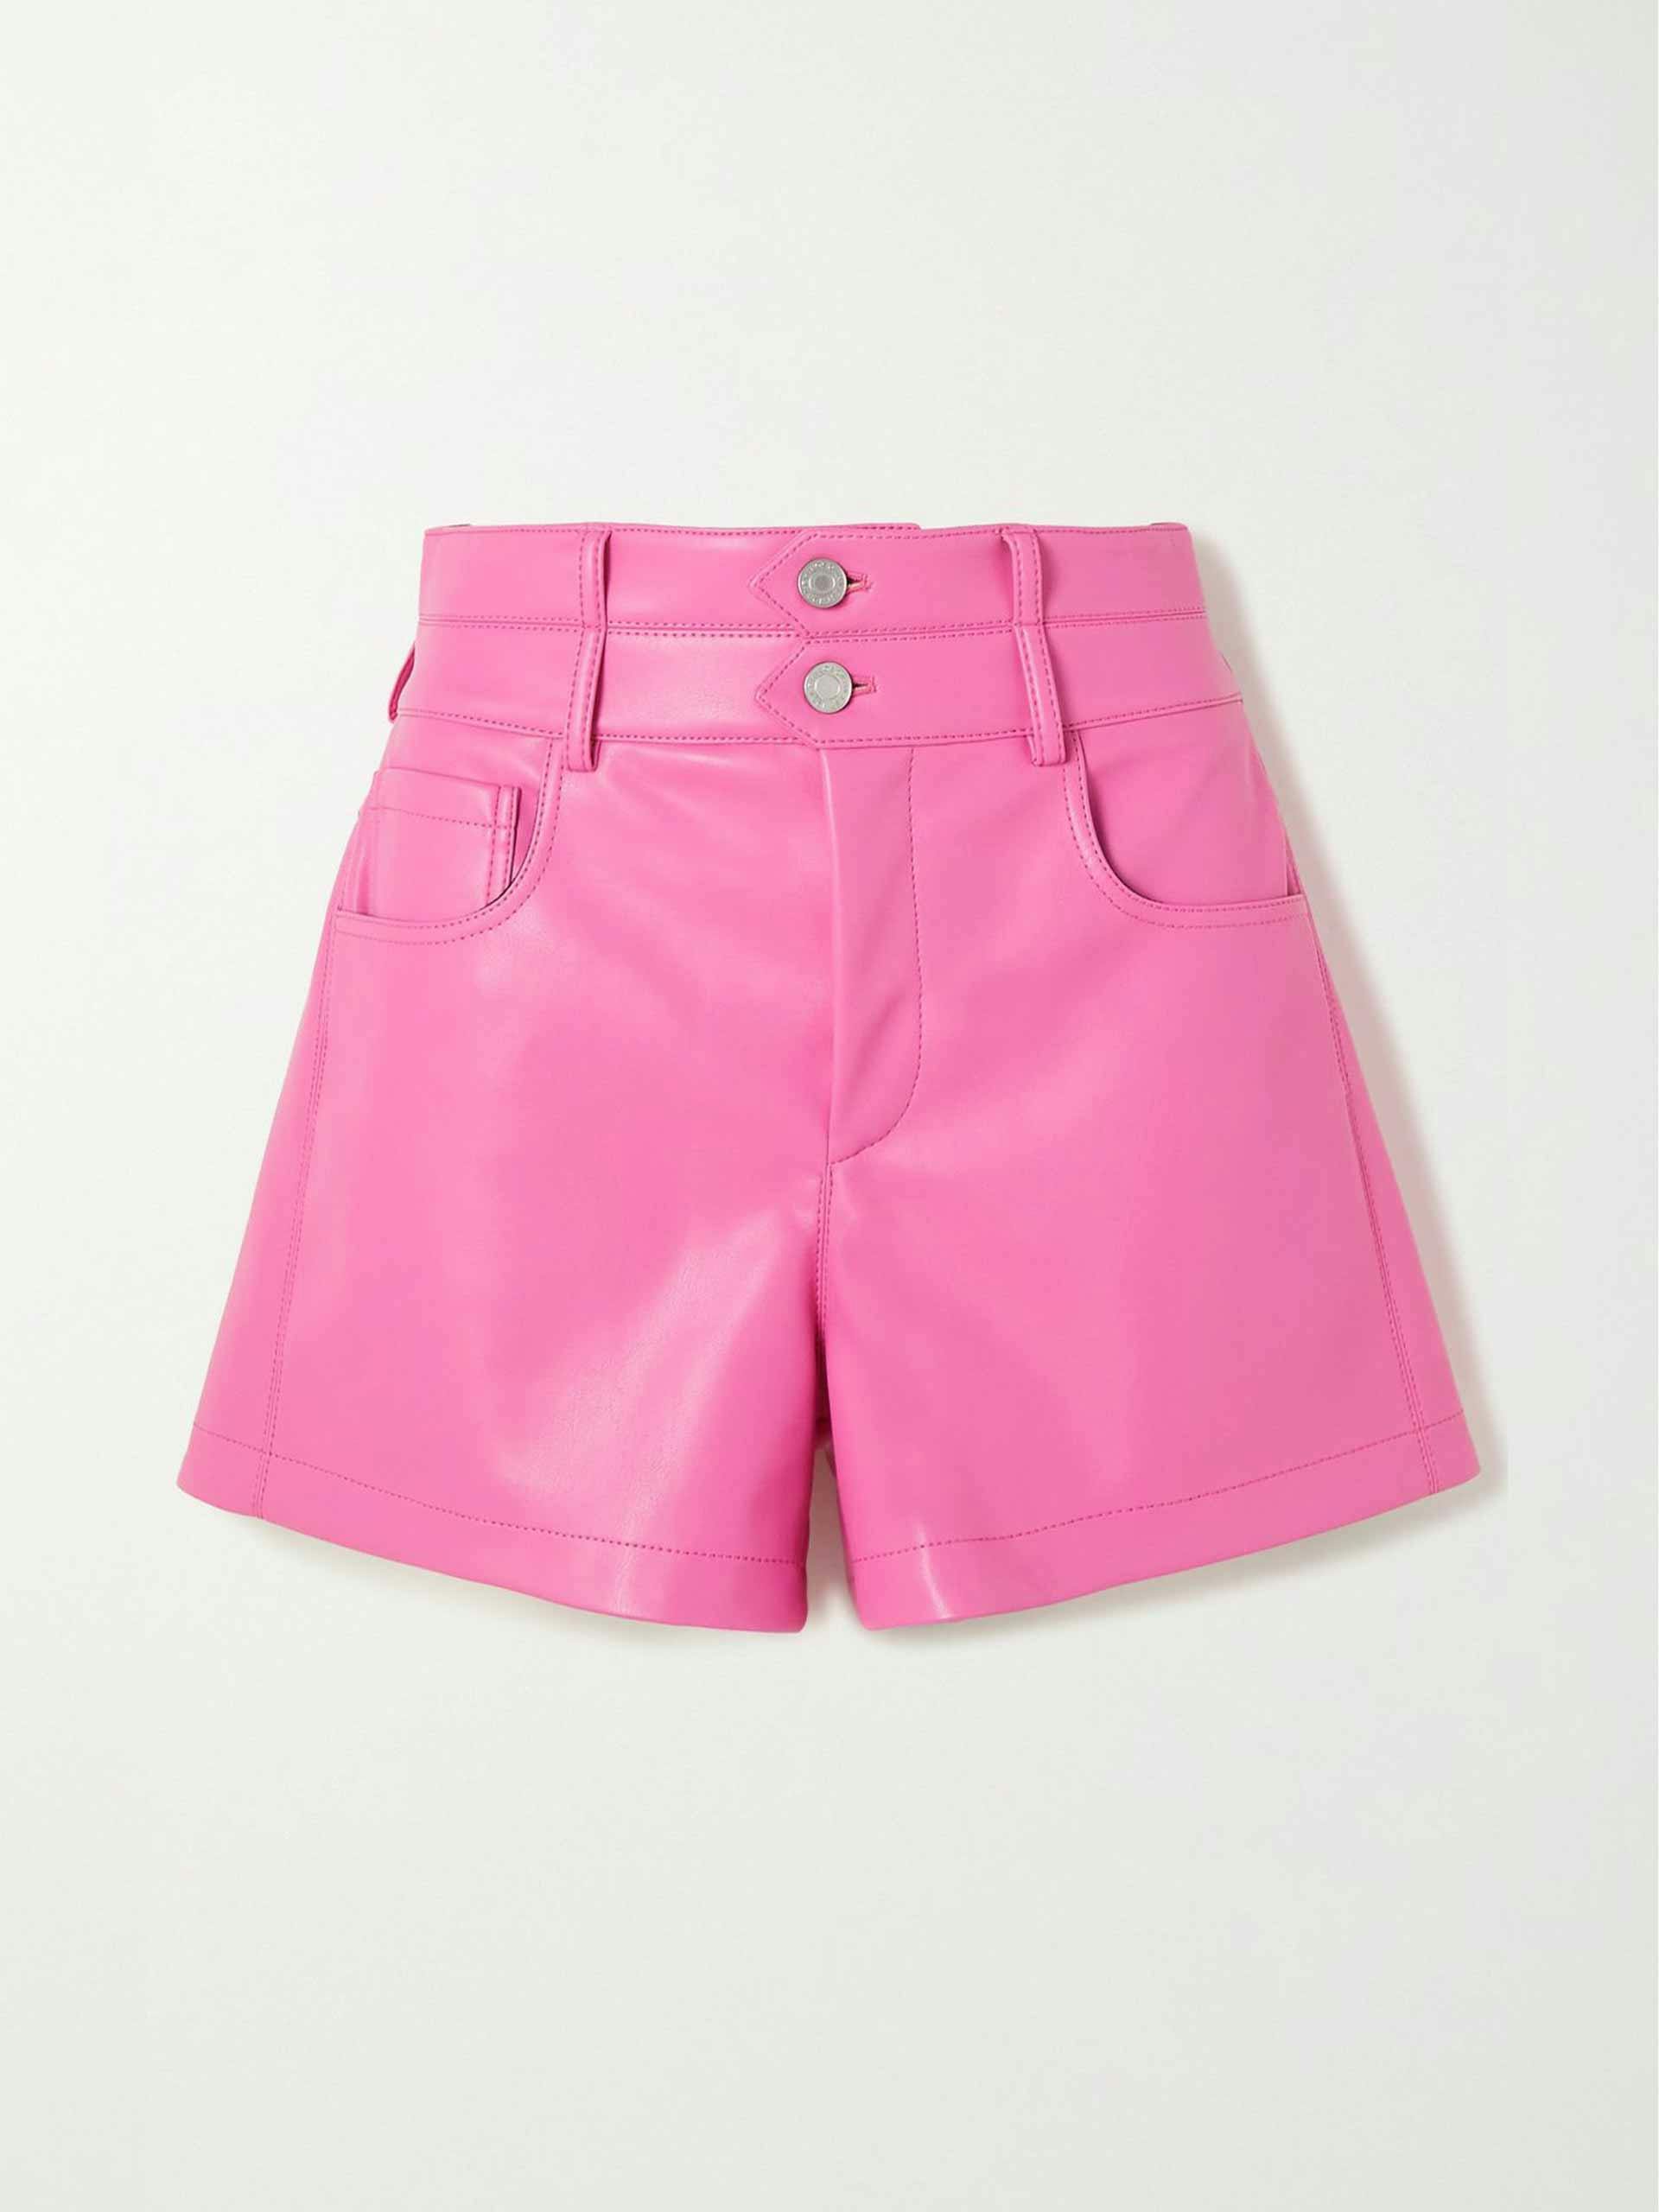 Pink leather shorts